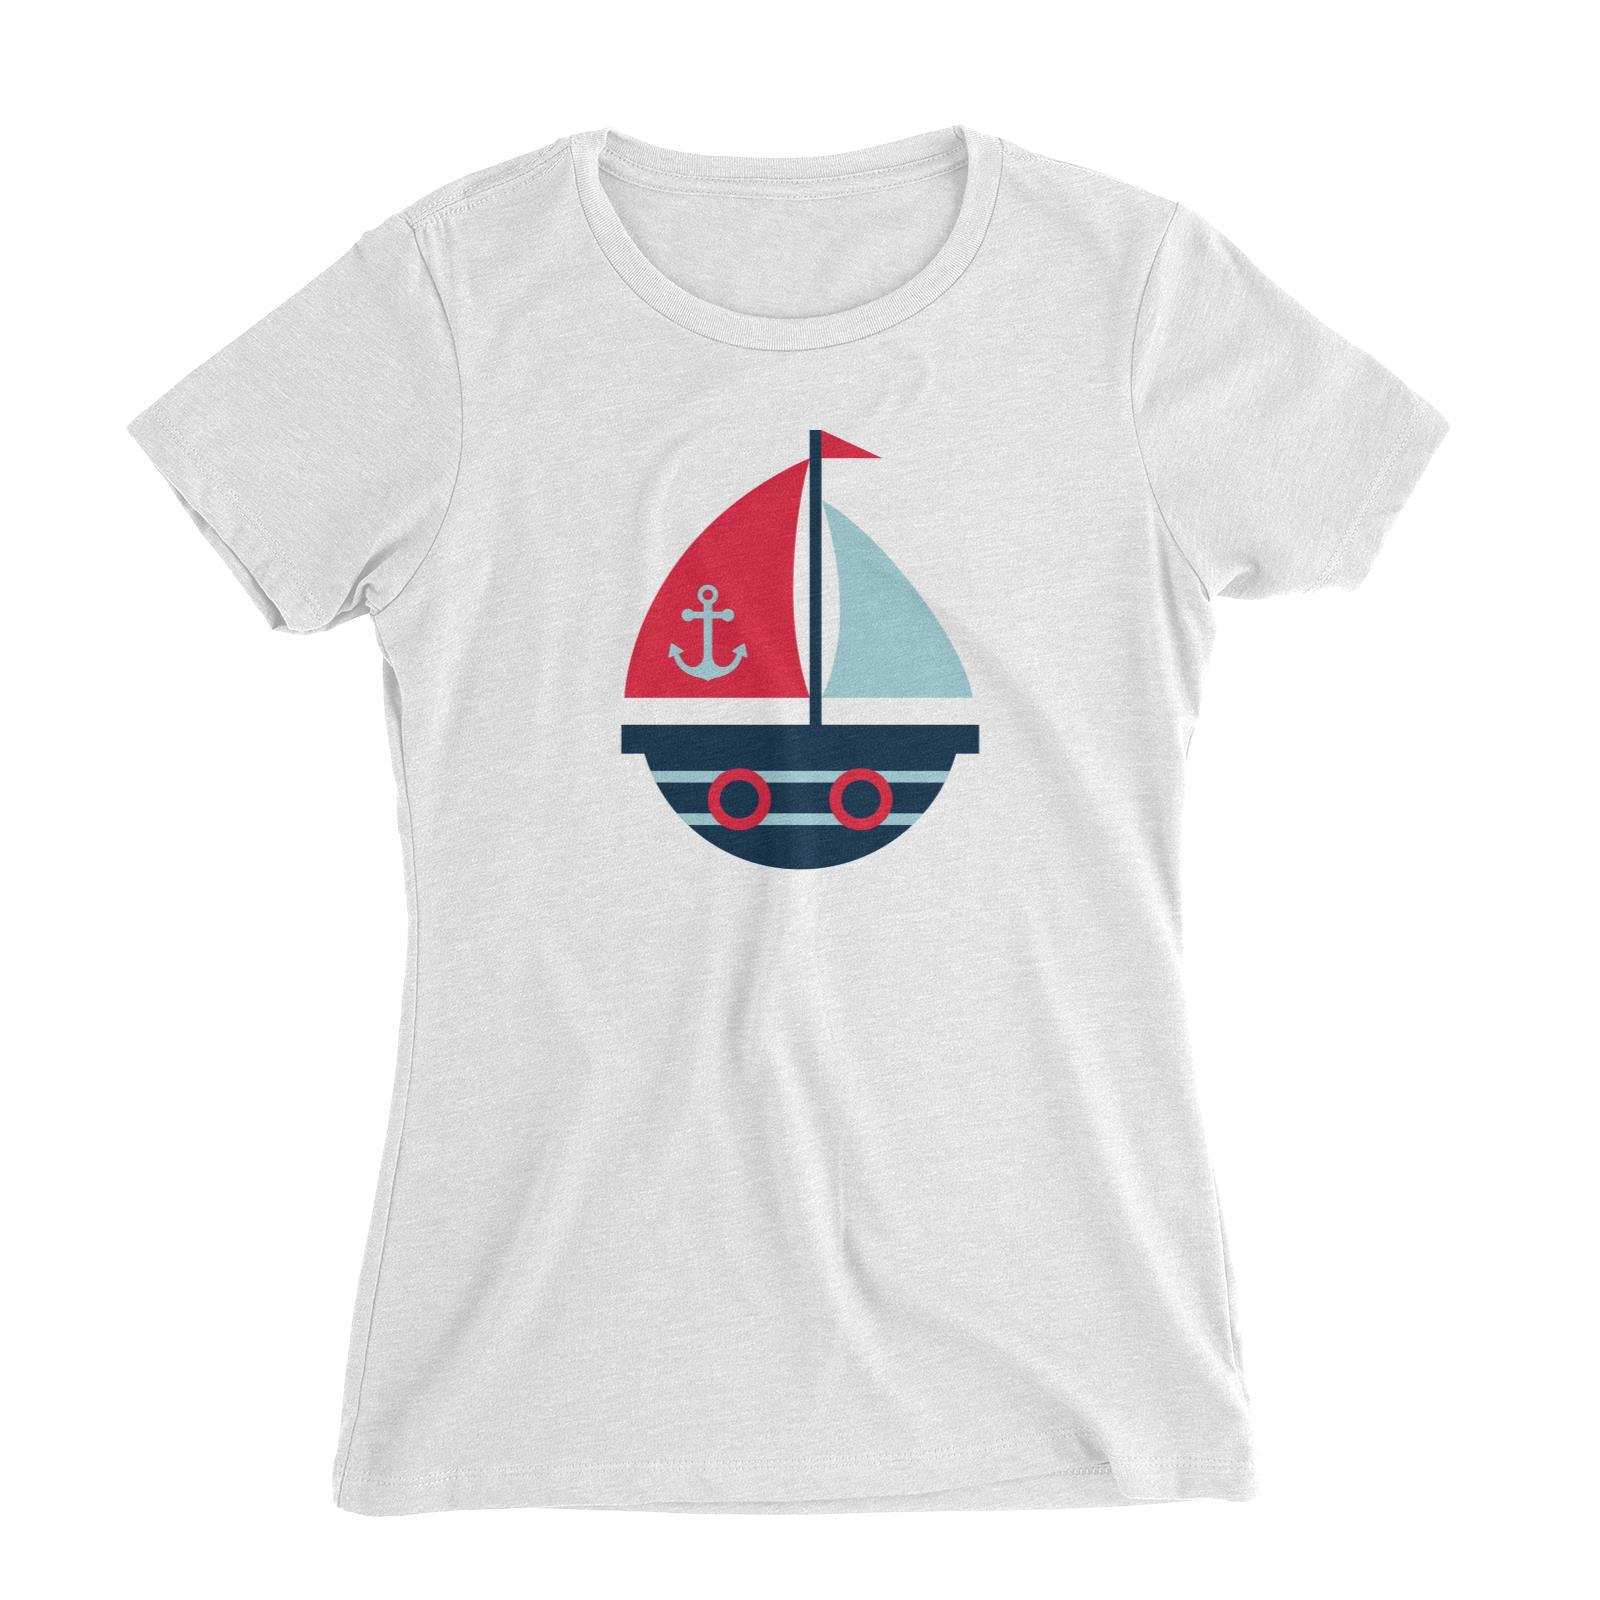 Sailor Boat Women's Slim Fit T-Shirt  Matching Family Personalizable Designs